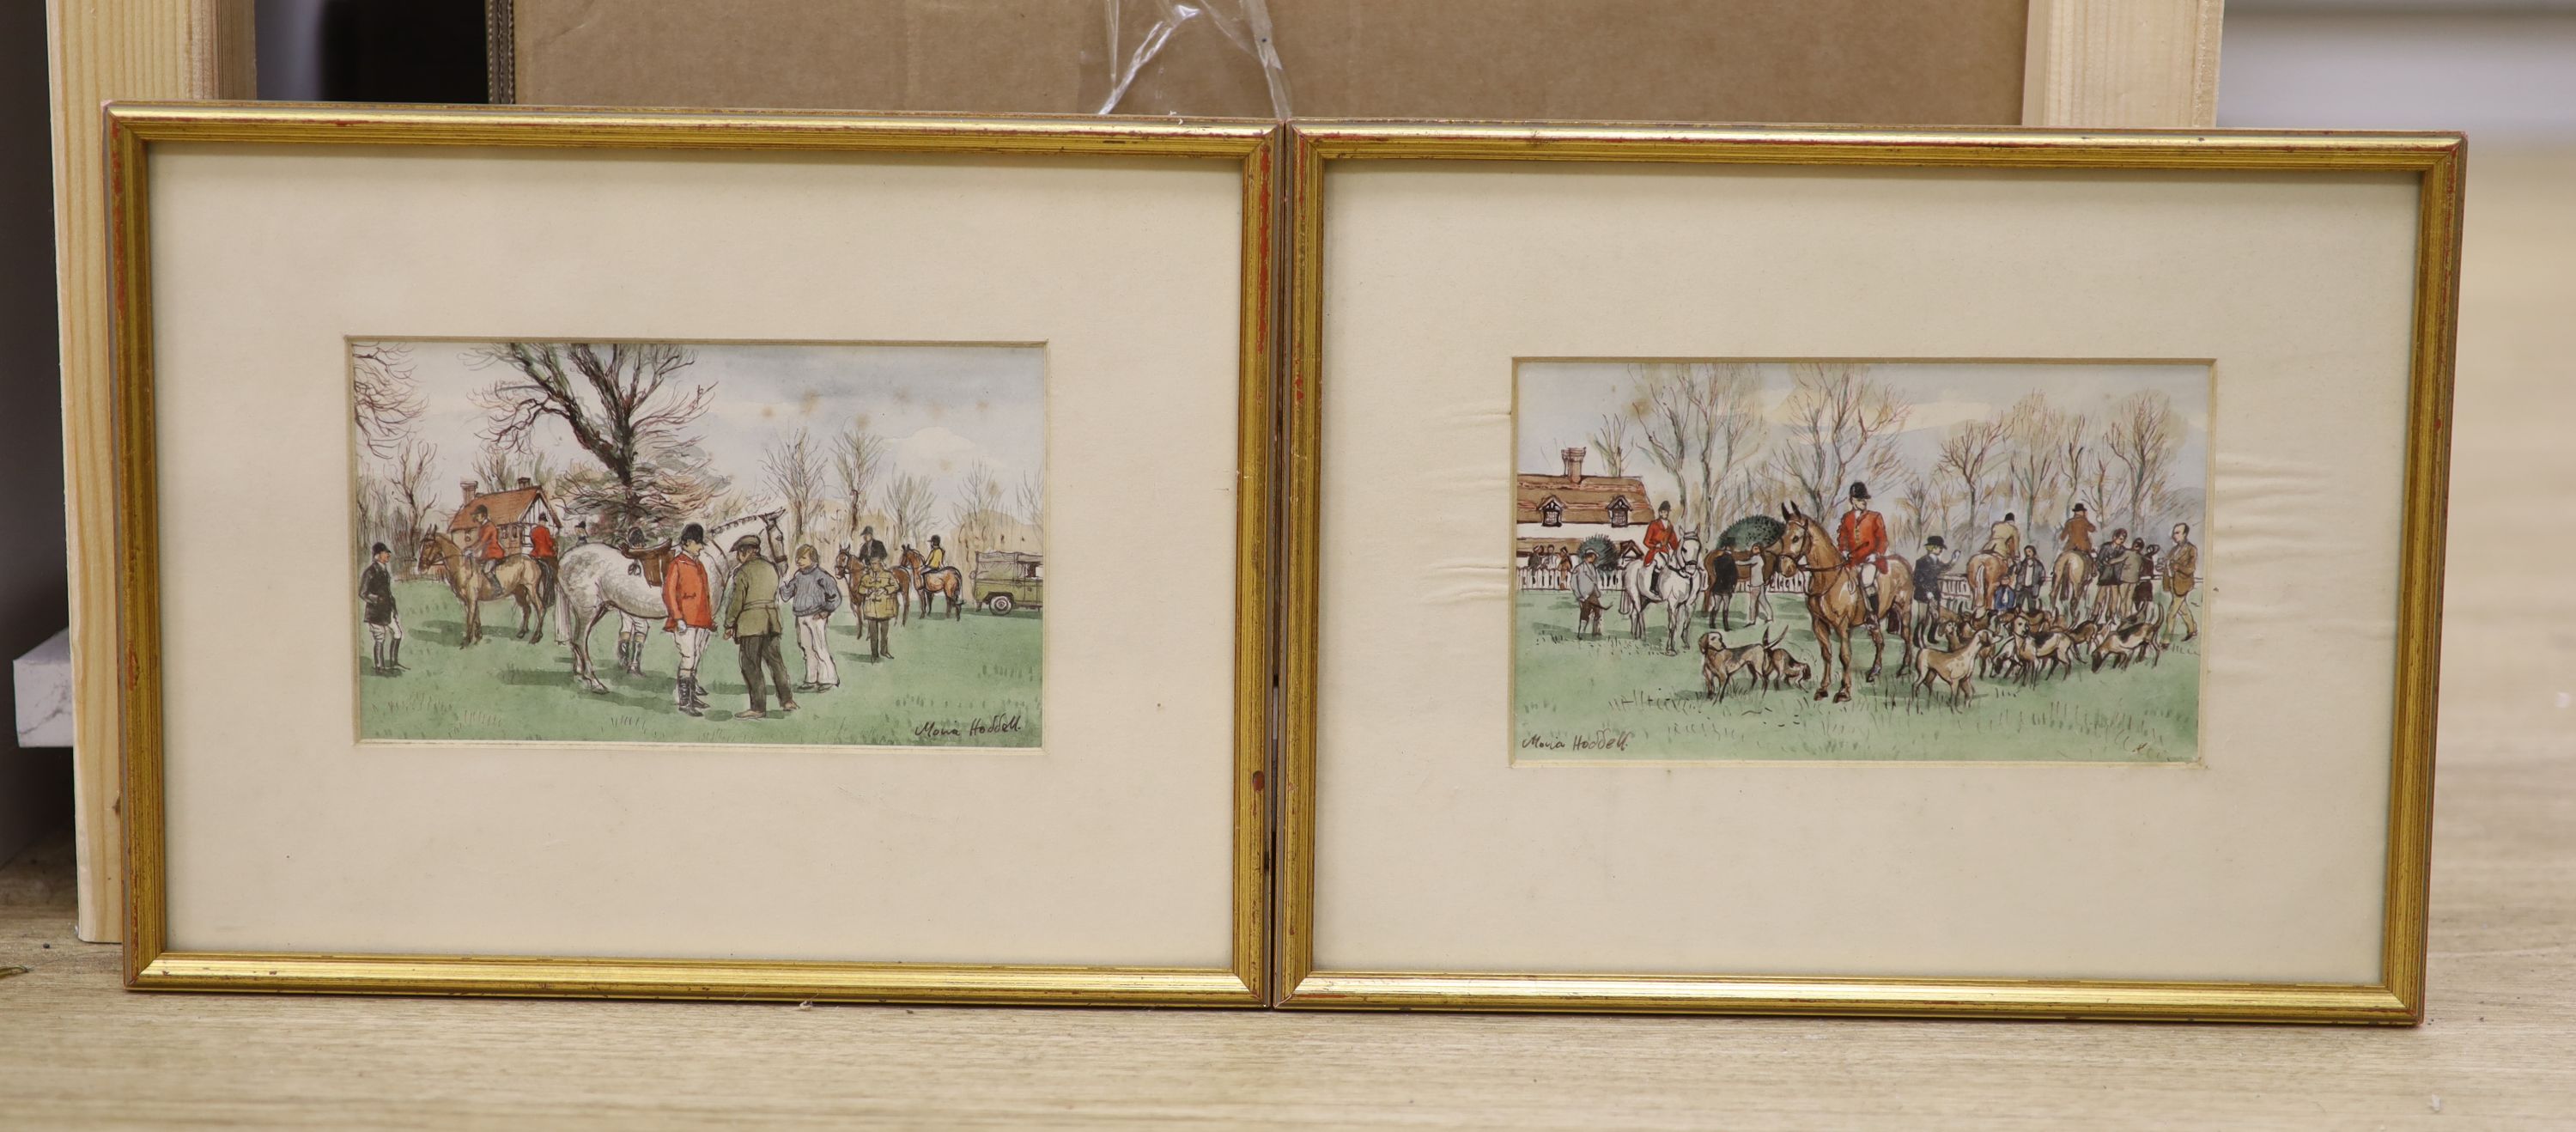 Moira Hoddell, two watercolours, 'The Meet at Offham' and 'Hunting Folk', signed, largest 10 x 17cm